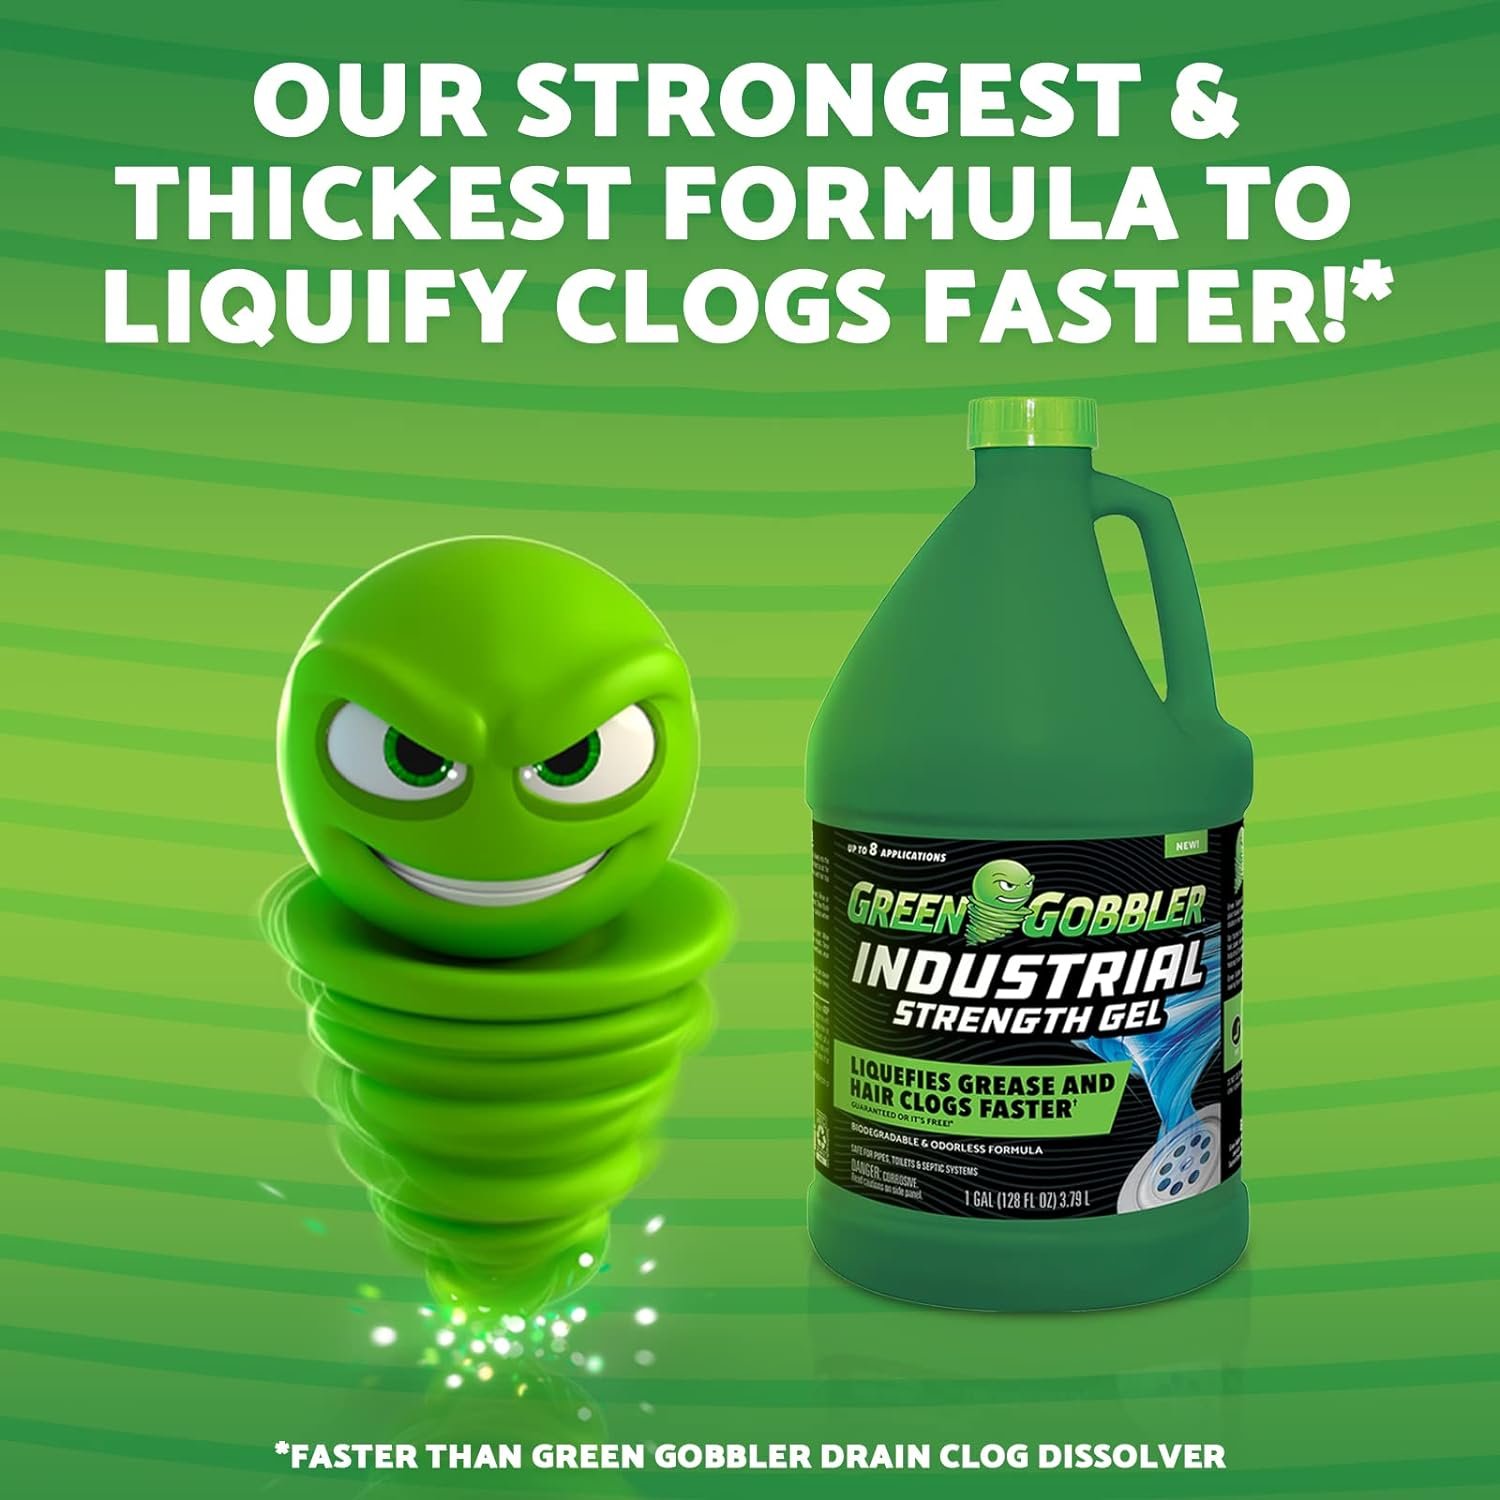 Green Gobbler Industrial Strength Grease and Hair Drain Clog Remover | Drain Cleaner Gel | Safe for Pipes, Toilets, Sinks, Tubs, Drains  Septic Systems | 1 Gallon